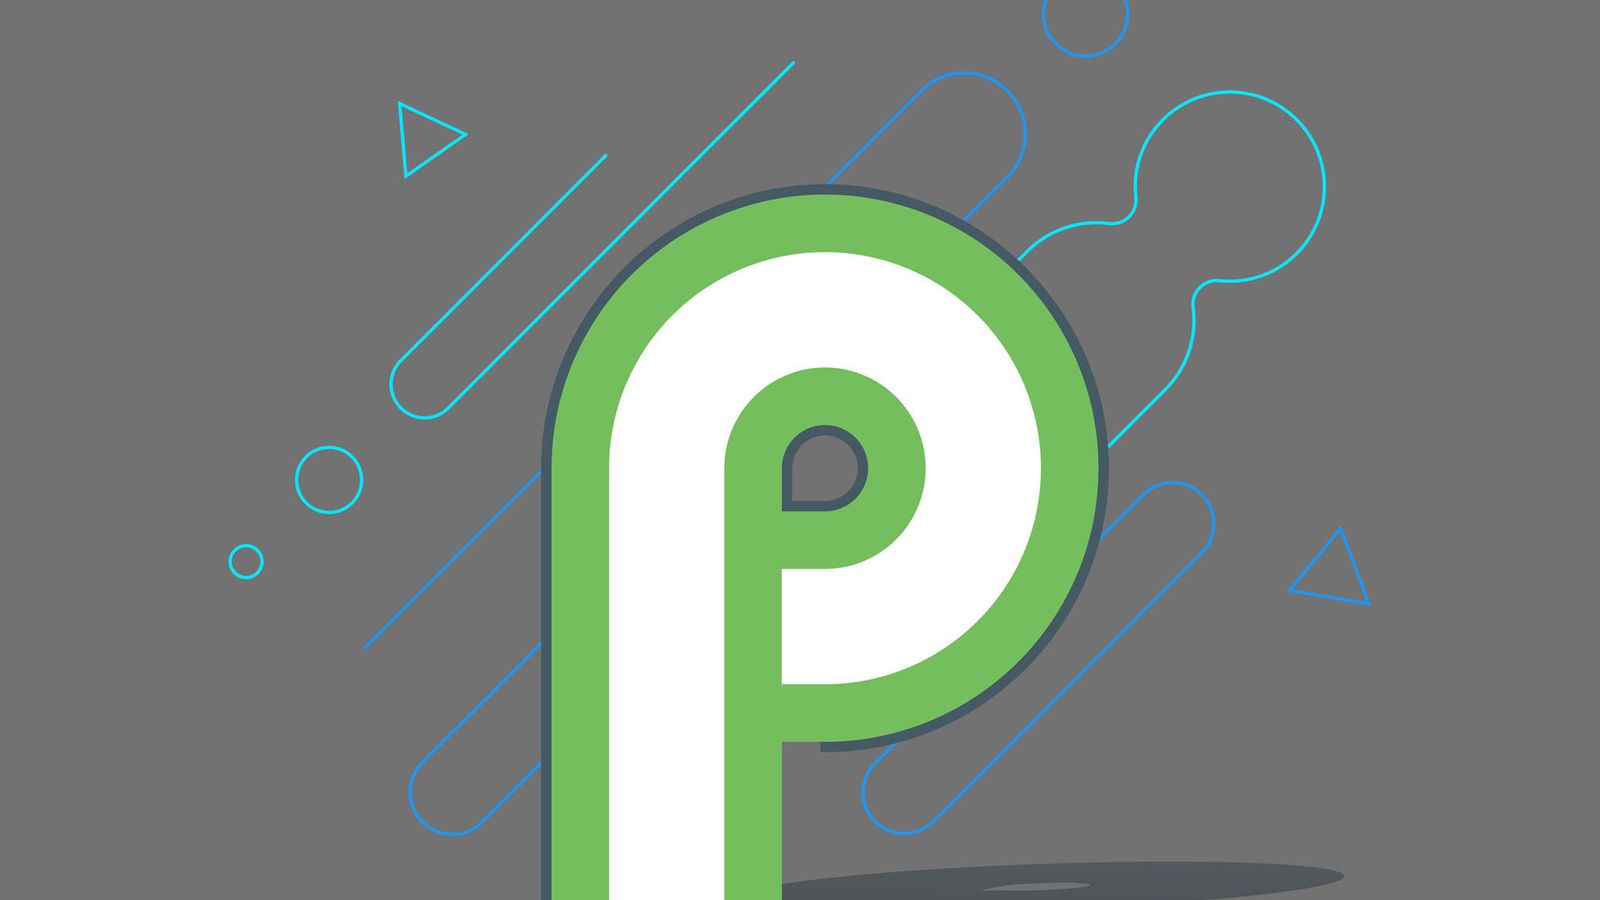 Android 9 Pie ROM Lineage 16 for Moto G4 Play(Harpia) 